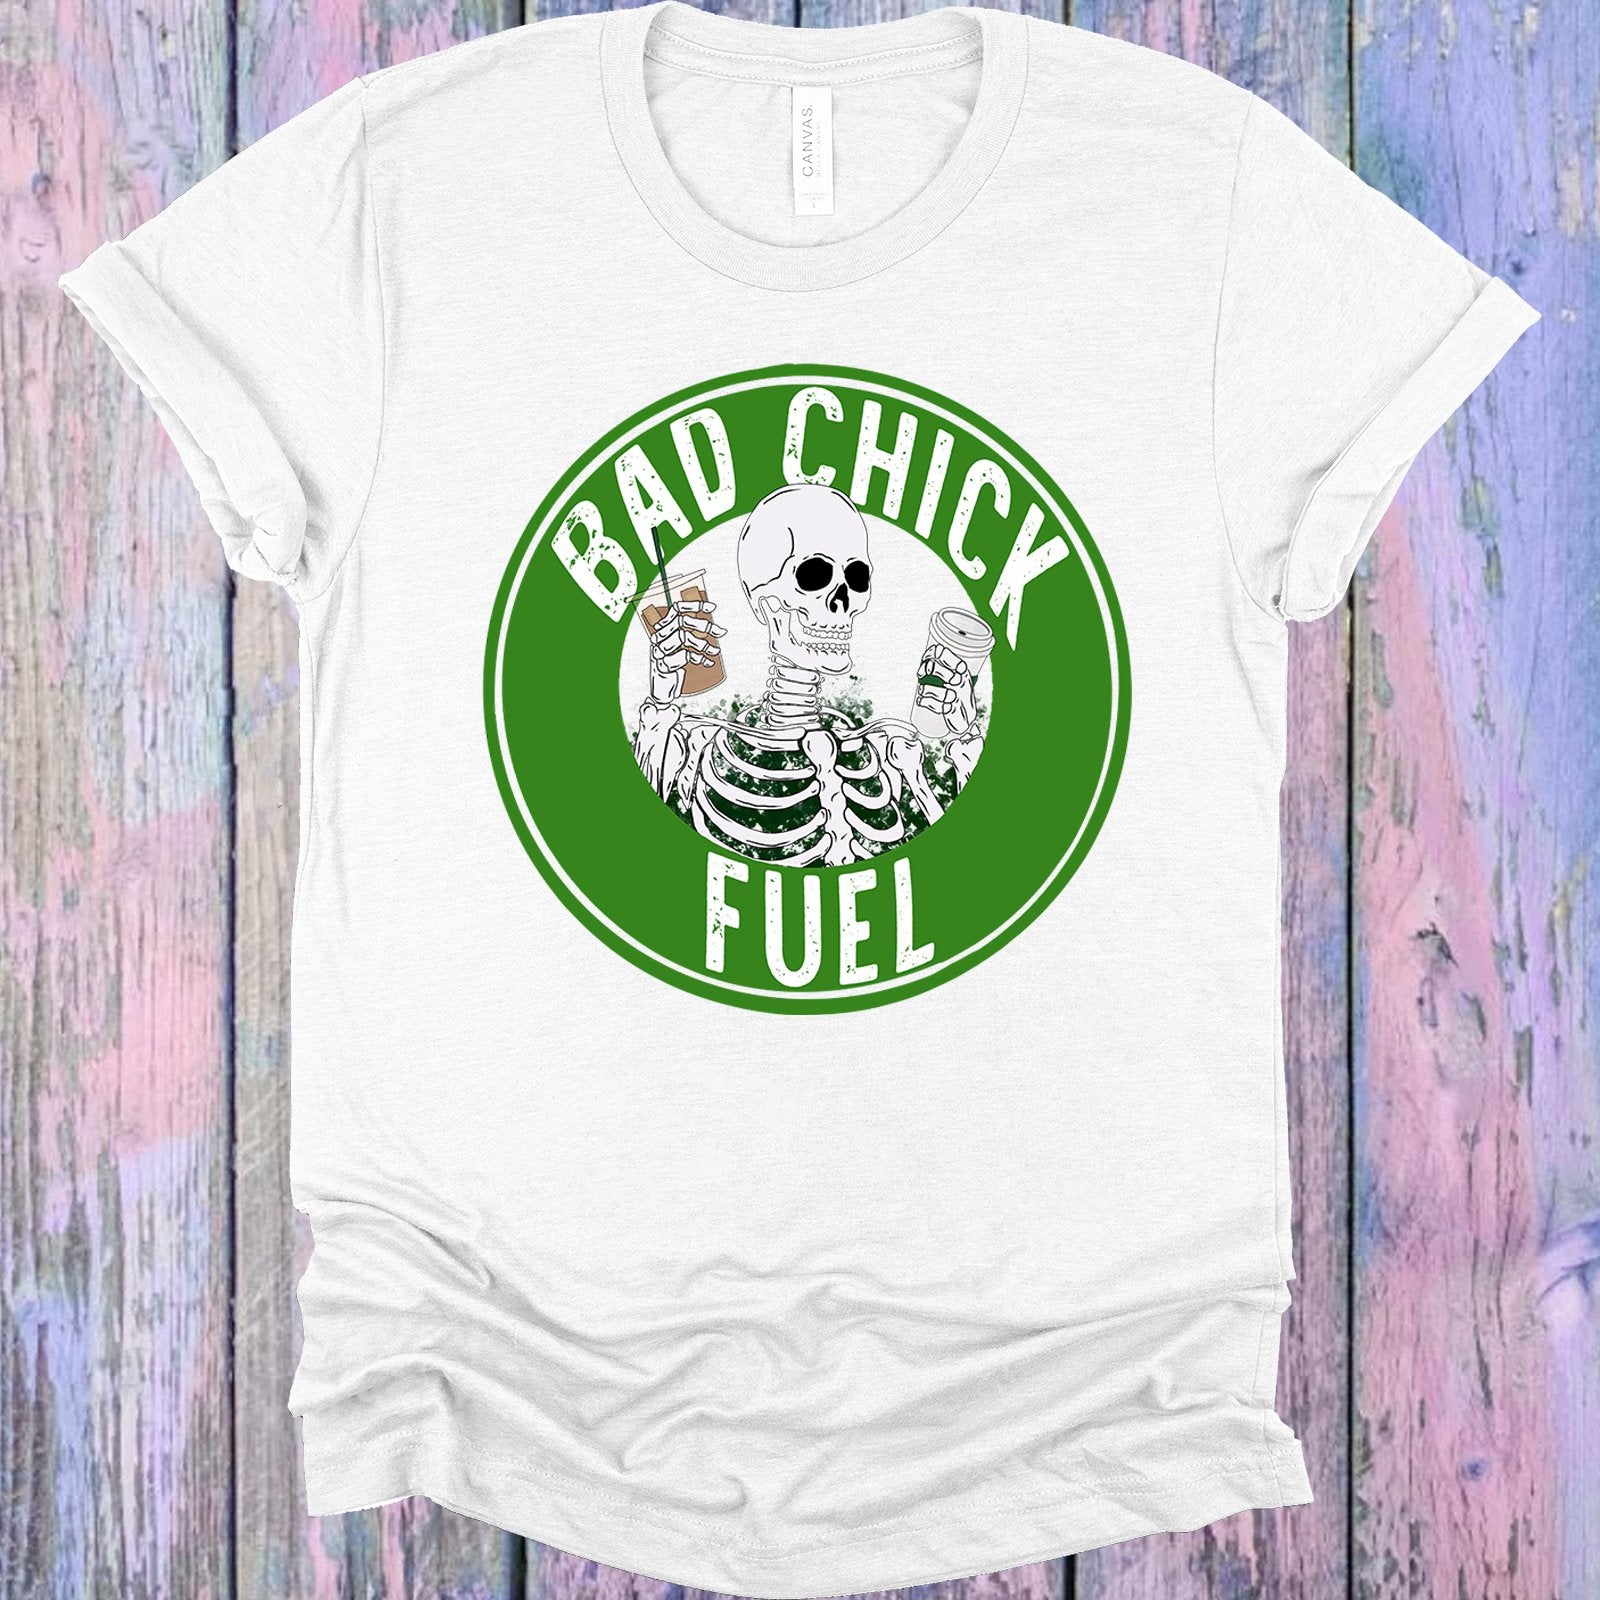 Bad Chick Fuel Graphic Tee Graphic Tee